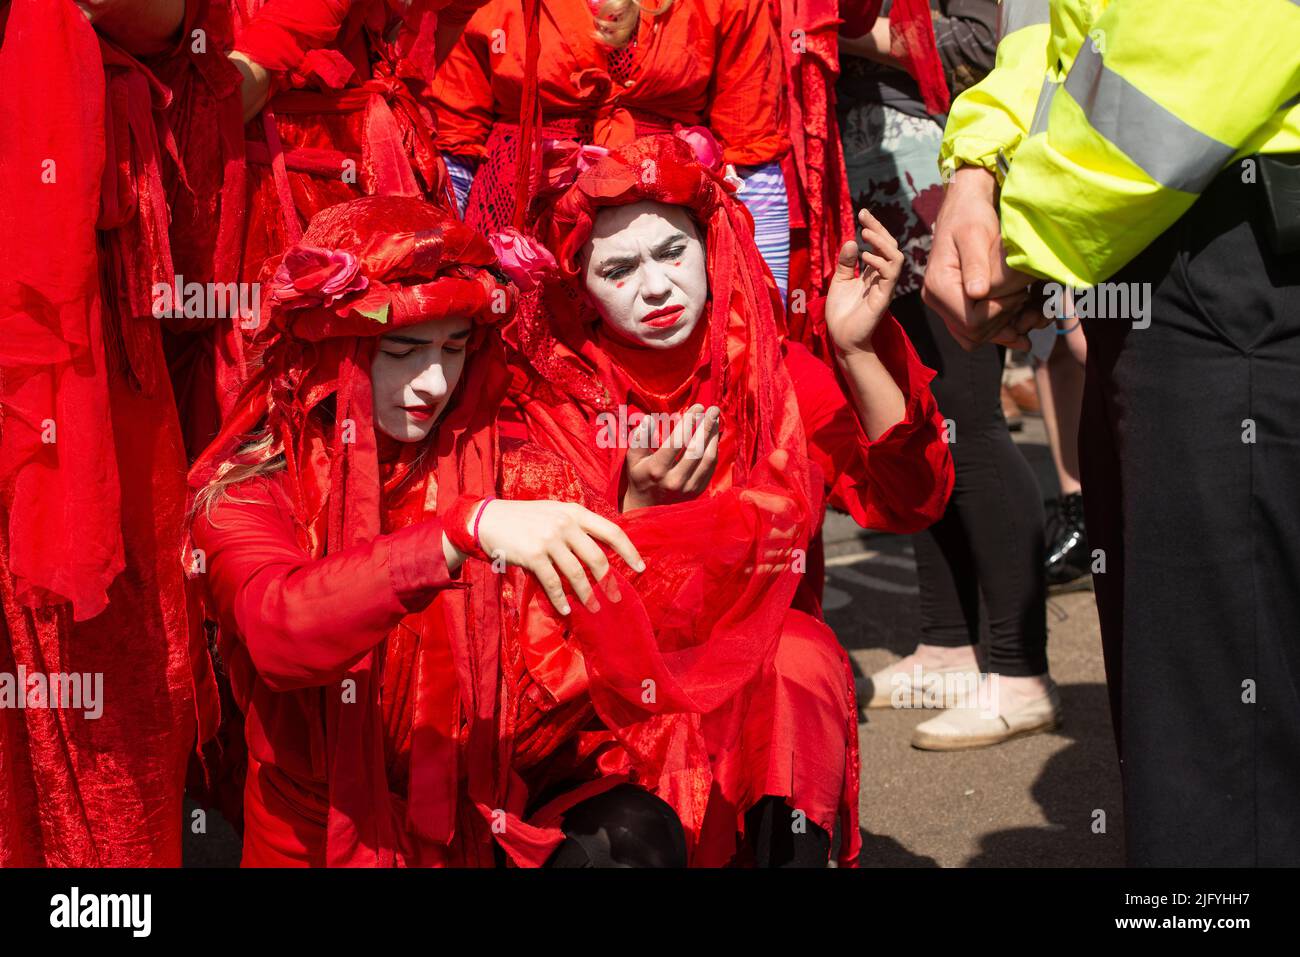 Red Brigade parade at the Extinction Rebellion demonstration, Oxford Circus, London, in protest of world climate breakdown and ecological collapse. Stock Photo